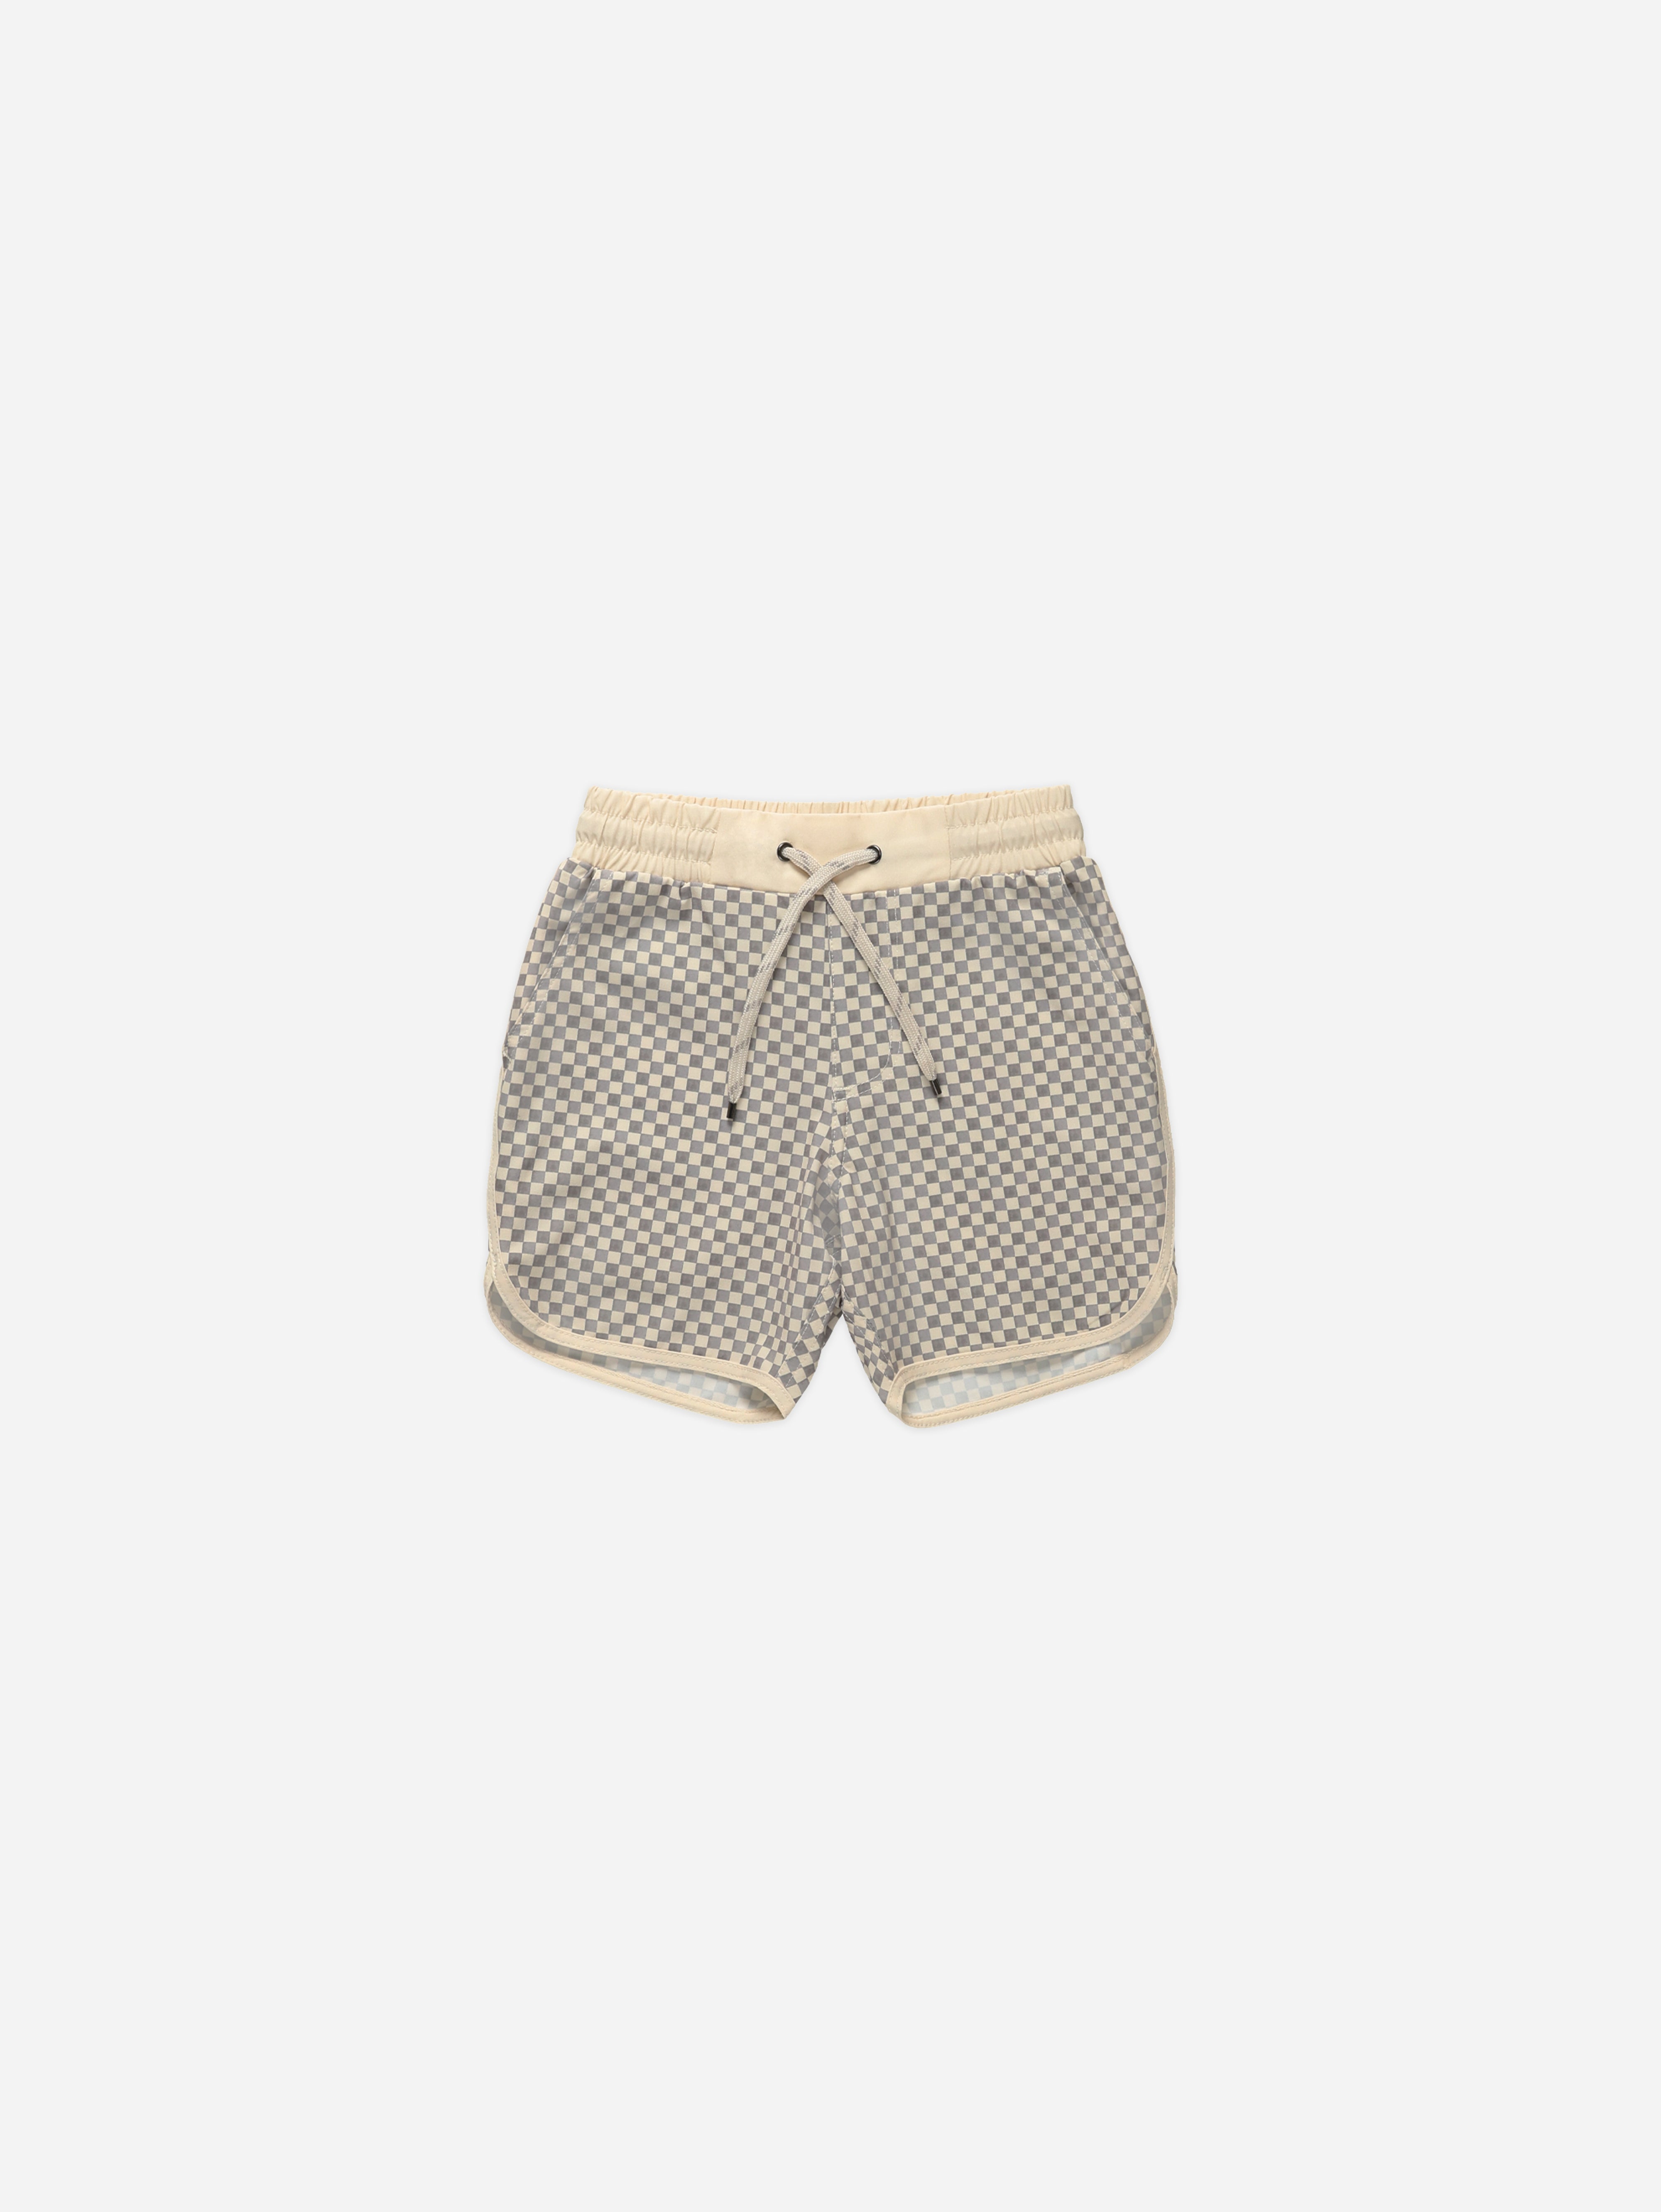 Del Mar Short || Grey Micro Check - Rylee + Cru | Kids Clothes | Trendy Baby Clothes | Modern Infant Outfits |